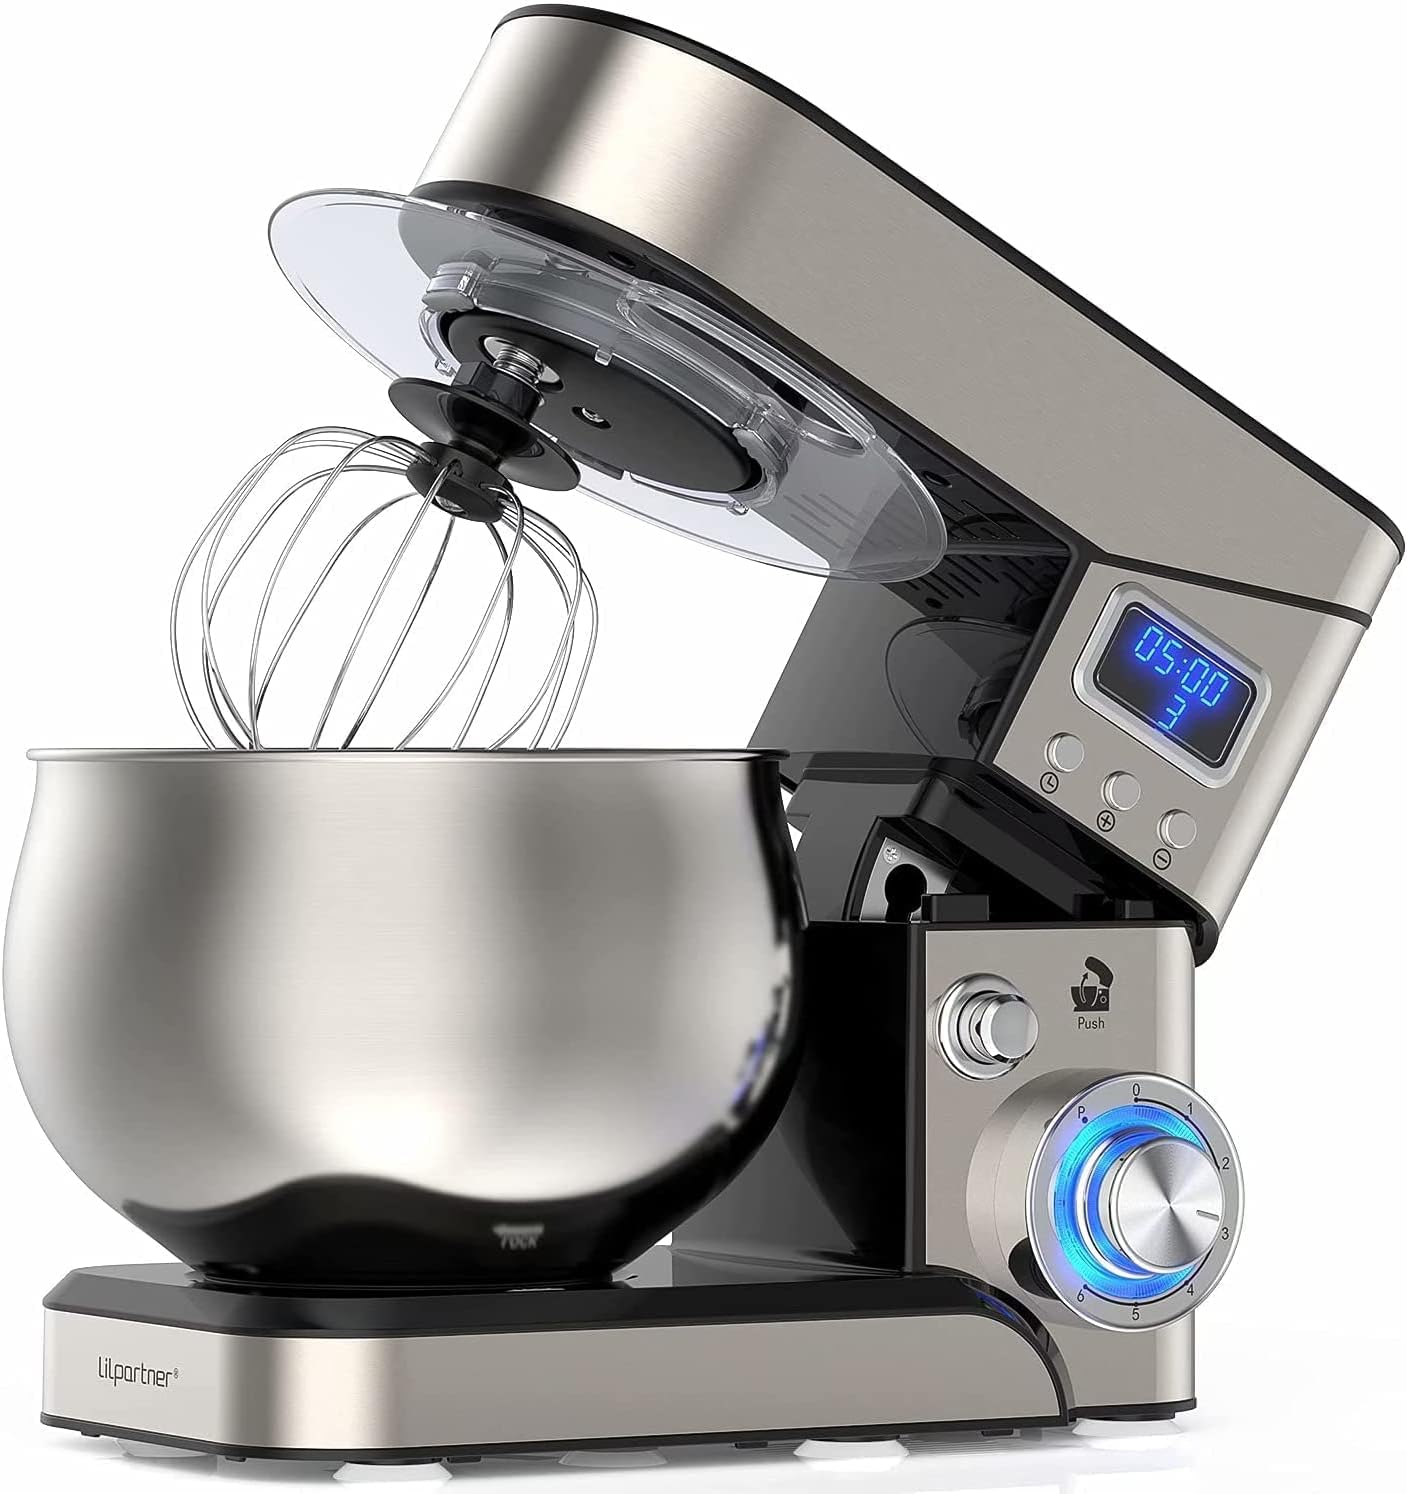 Stand Mixer - 1200W Stainless Steel Mixer with LCD Display and Accessories